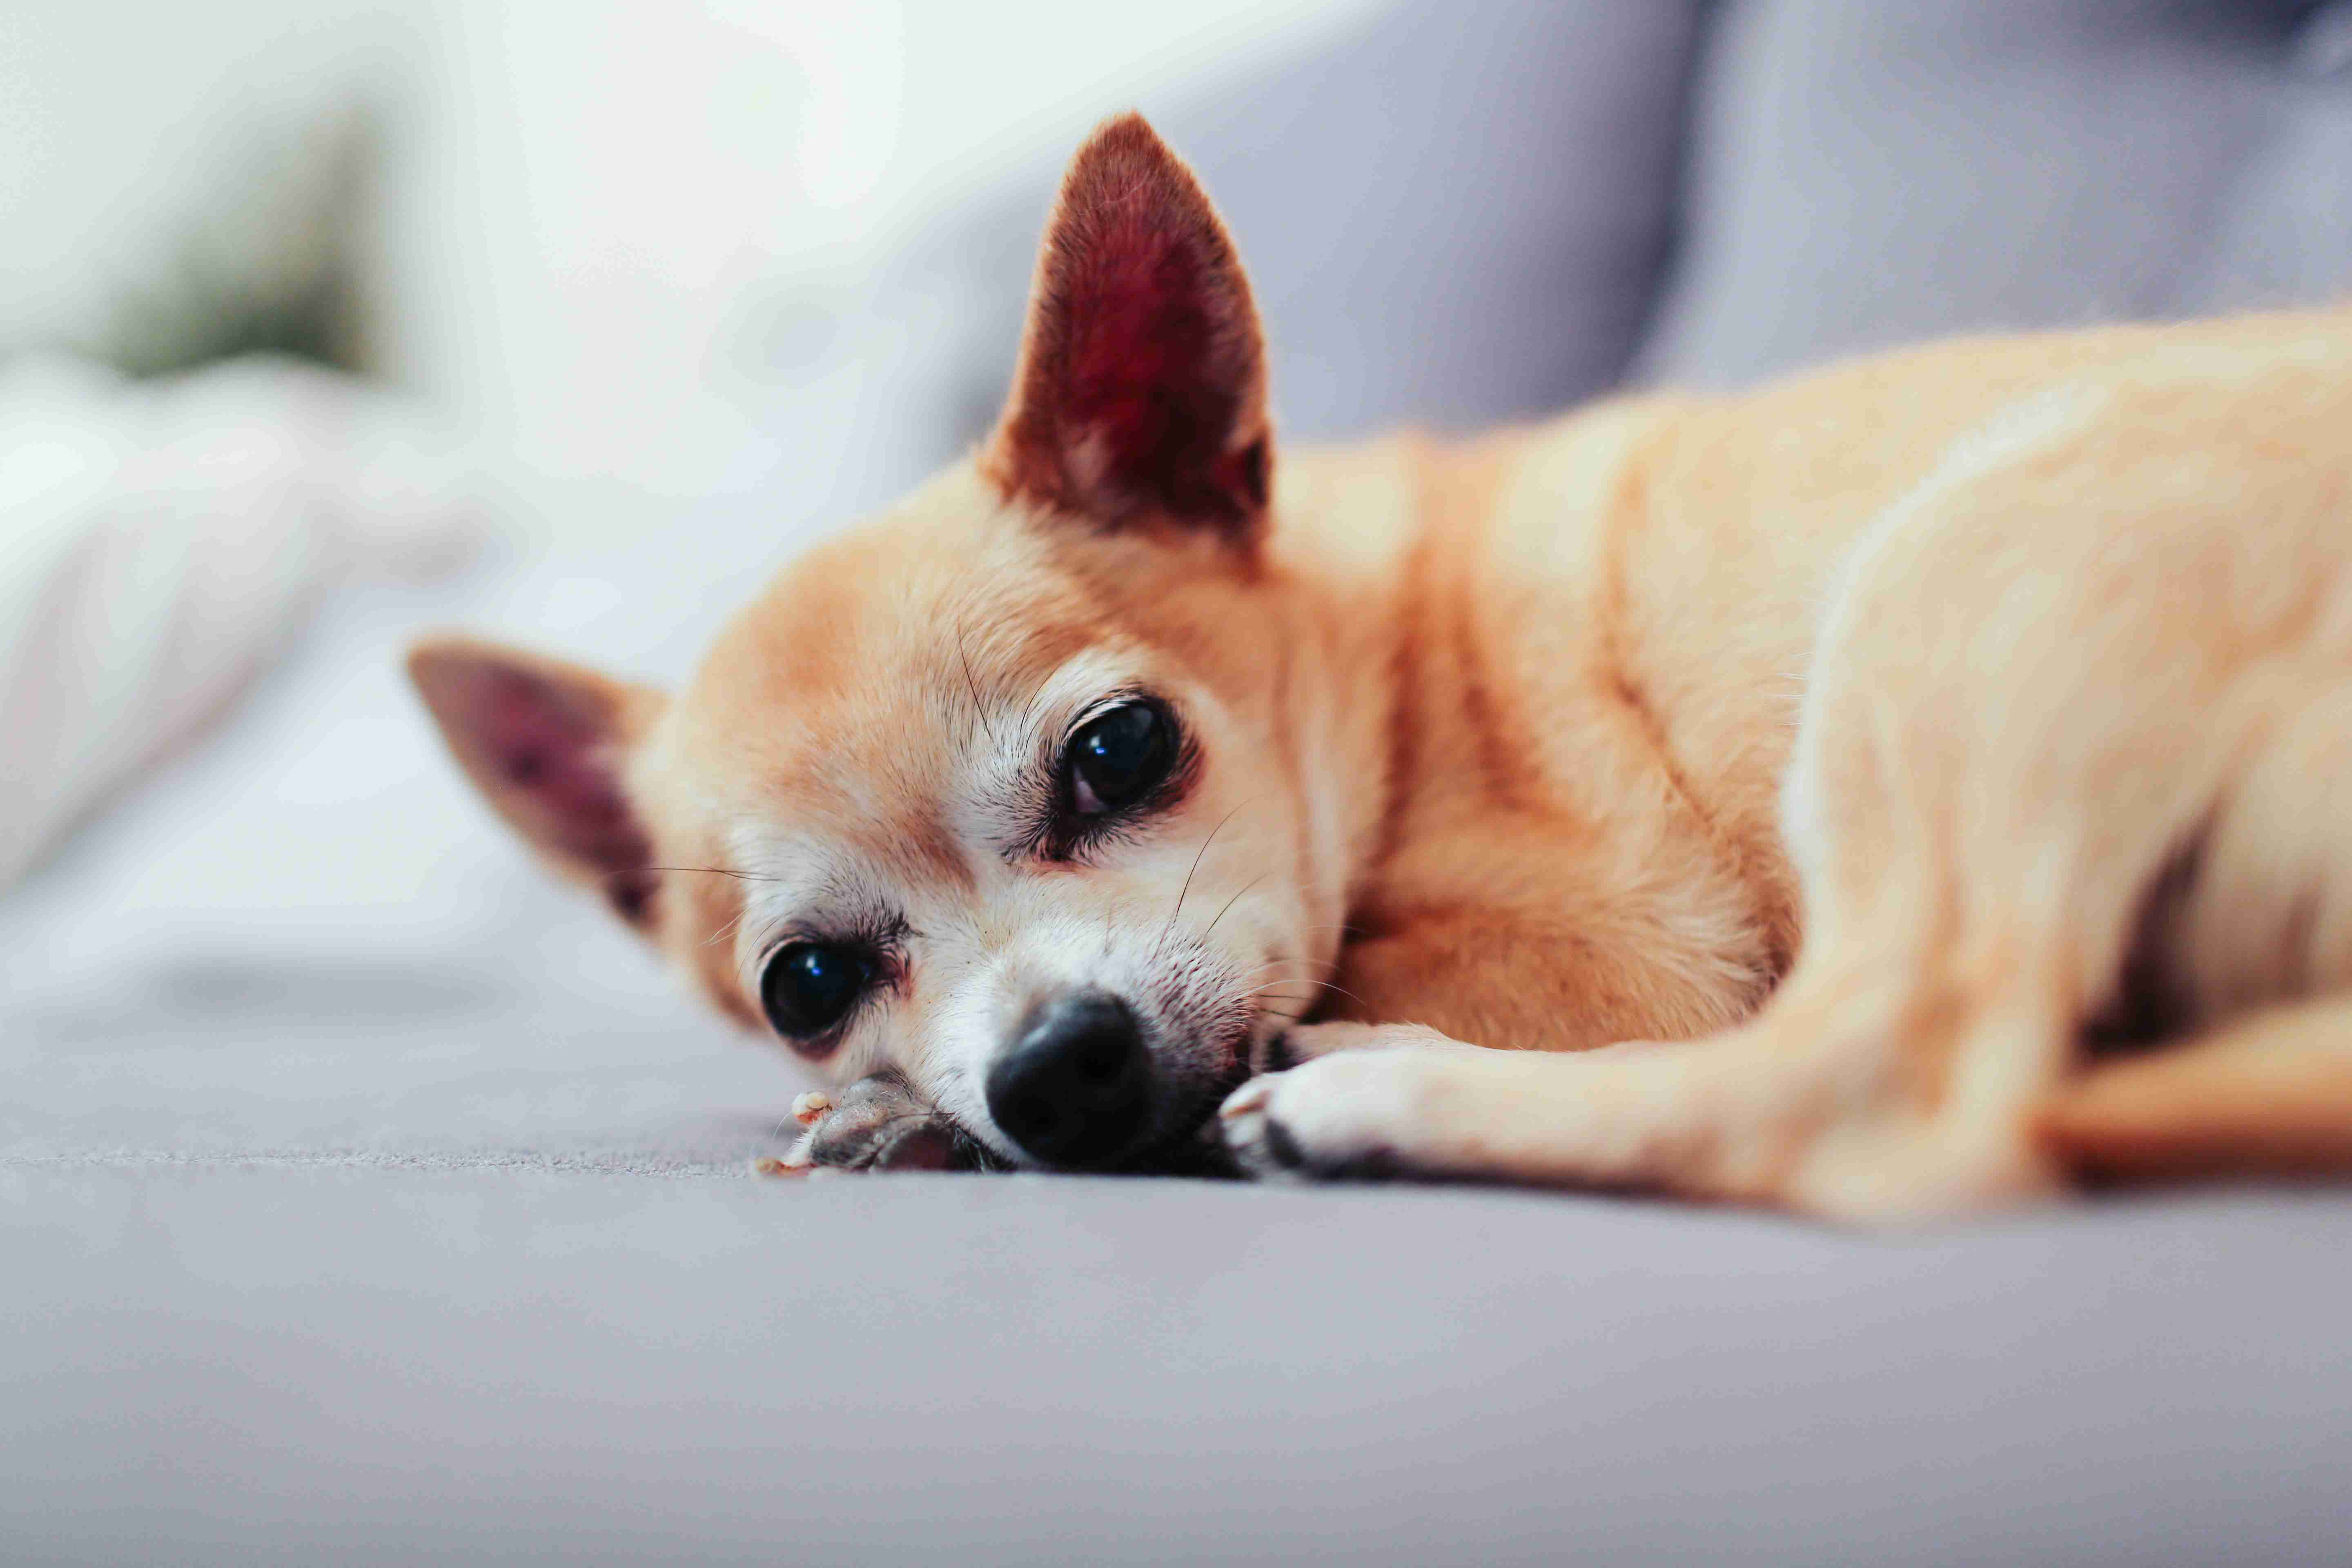 Can a Chihuahua's anger issues be triggered by specific noises or sounds?